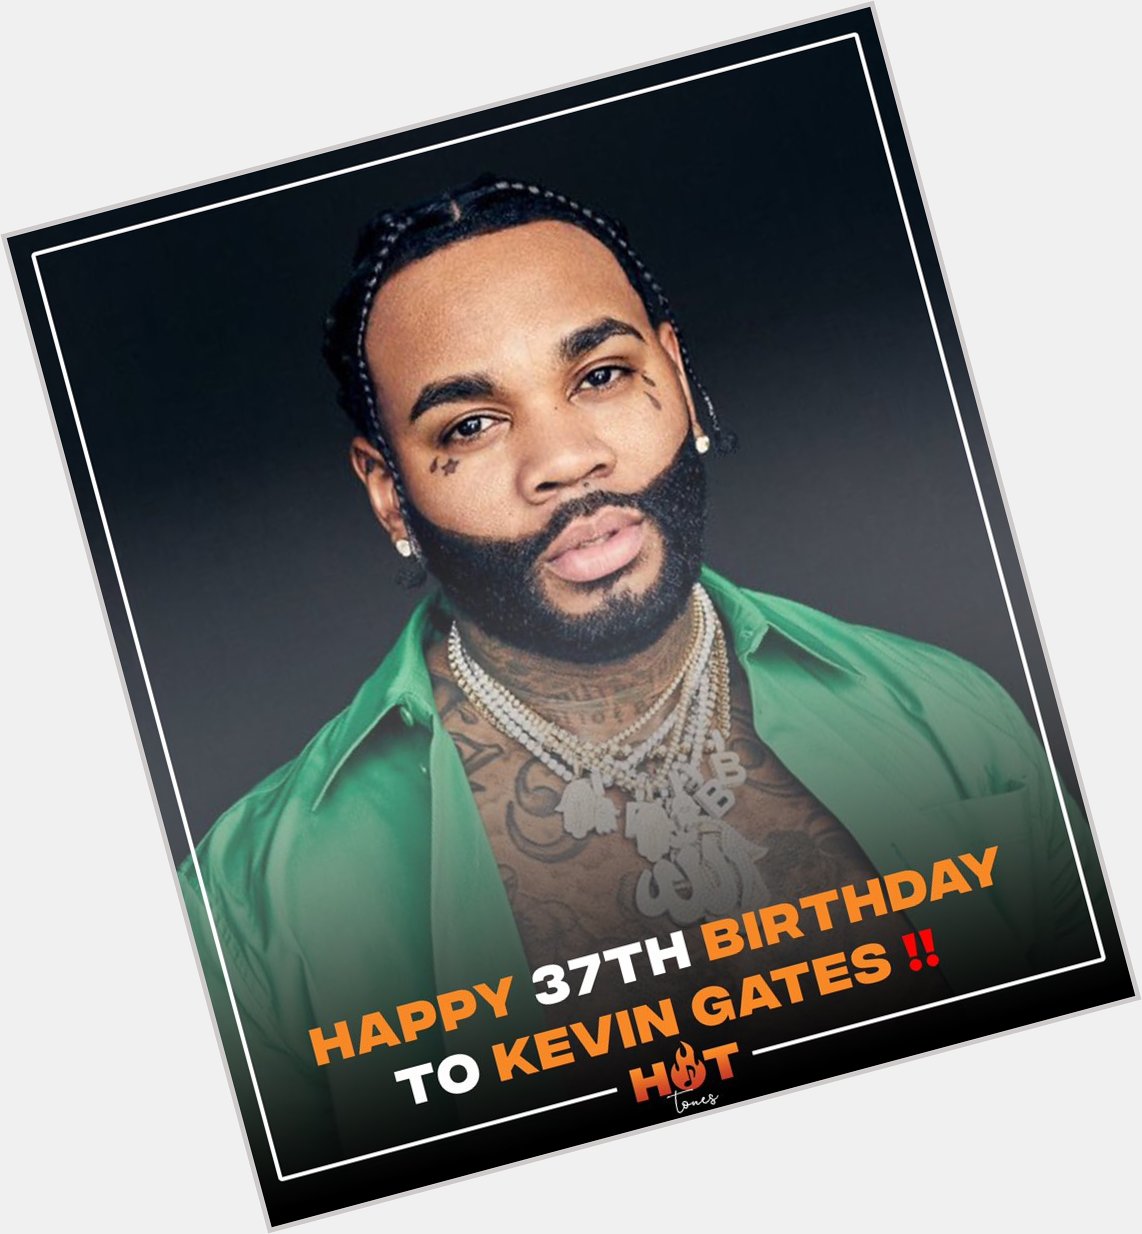 Happy 37th birthday to Kevin Gates  Favorite song from him  